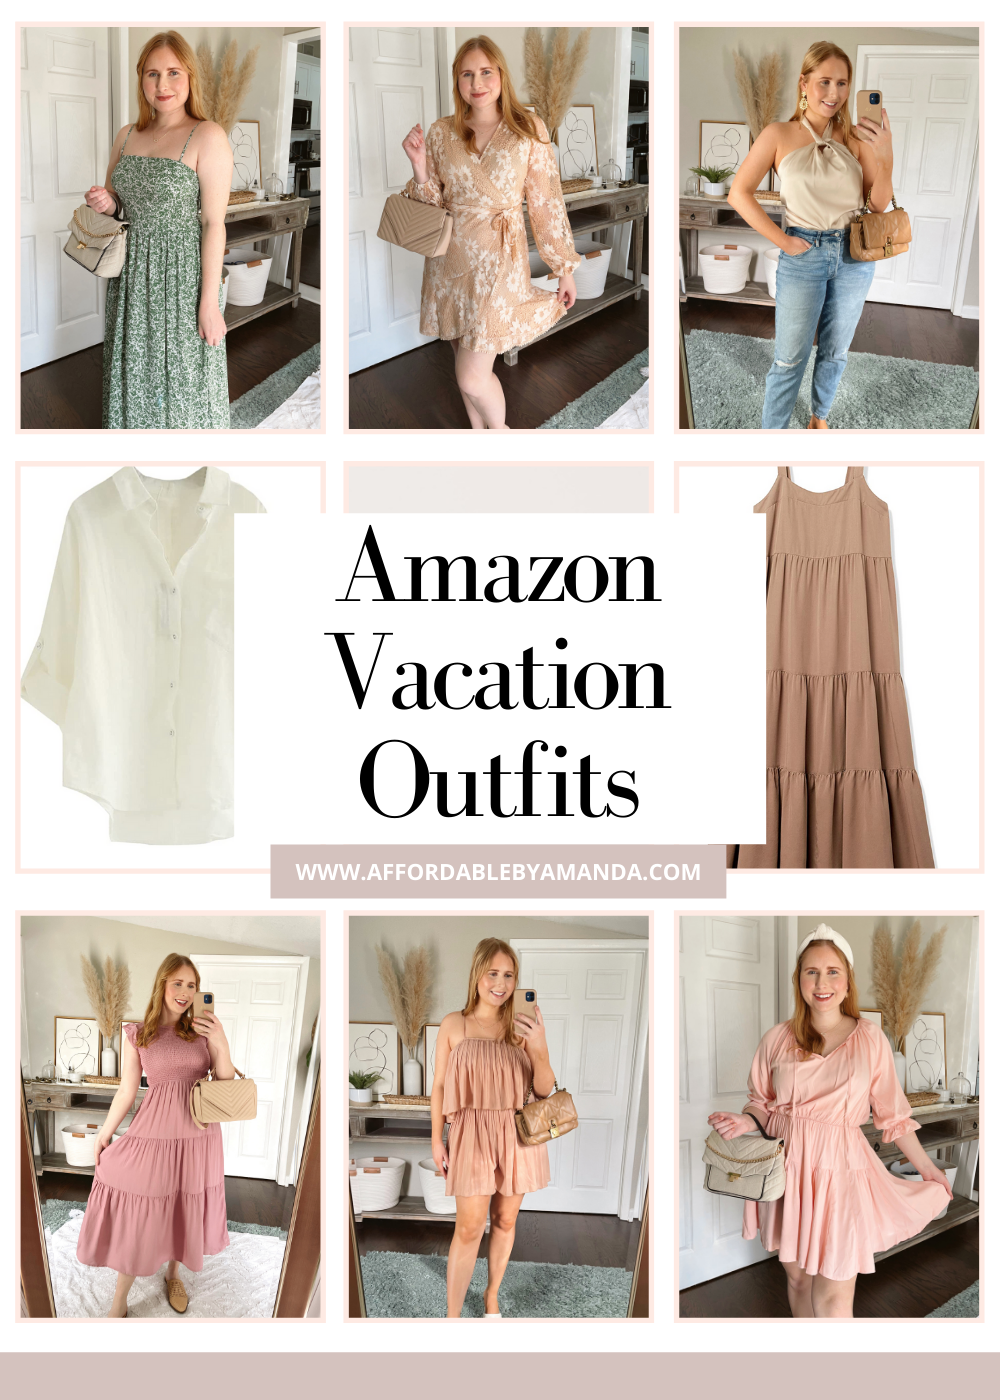 Amazon Vacation Outfits 2022 - Affordable by Amanda